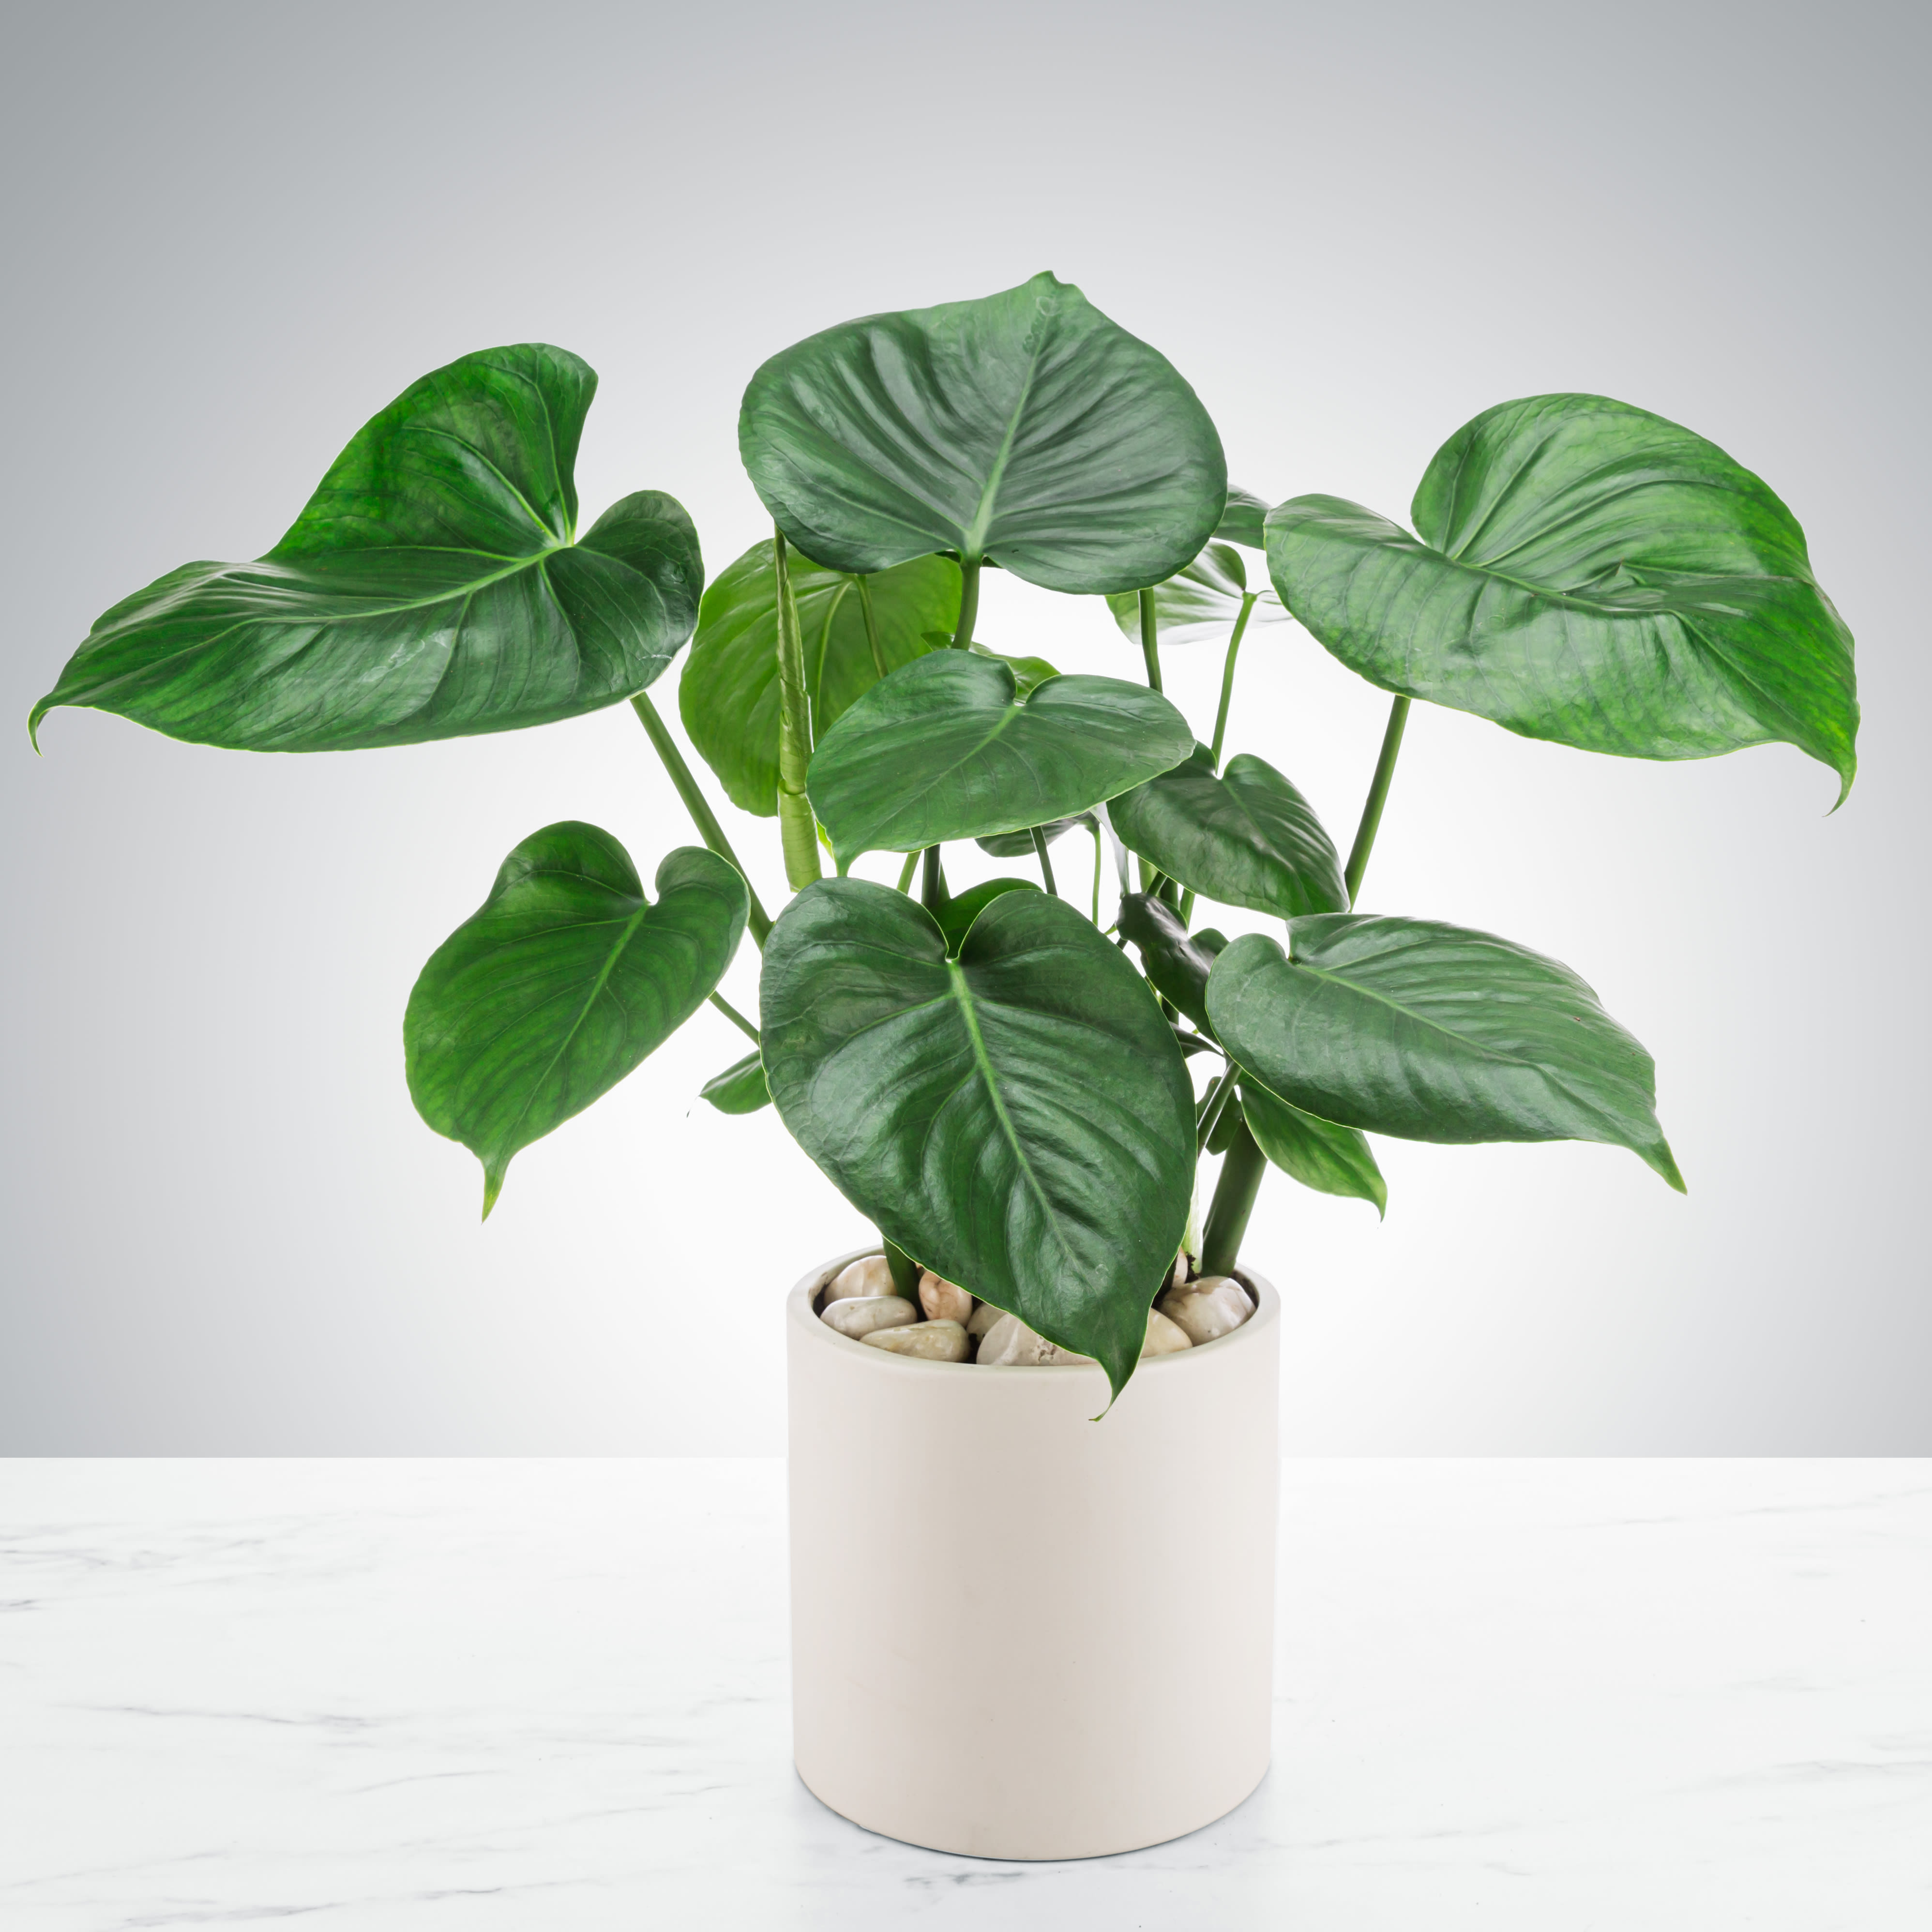 Split Leaf Philodendron by BloomNation™ - The split-leaf philodendron, also referred to as a monstera, is a classic house plant that leaves split as it grows under the sun. Enjoyed by everyone, this houseplant is a great addition to any collection.